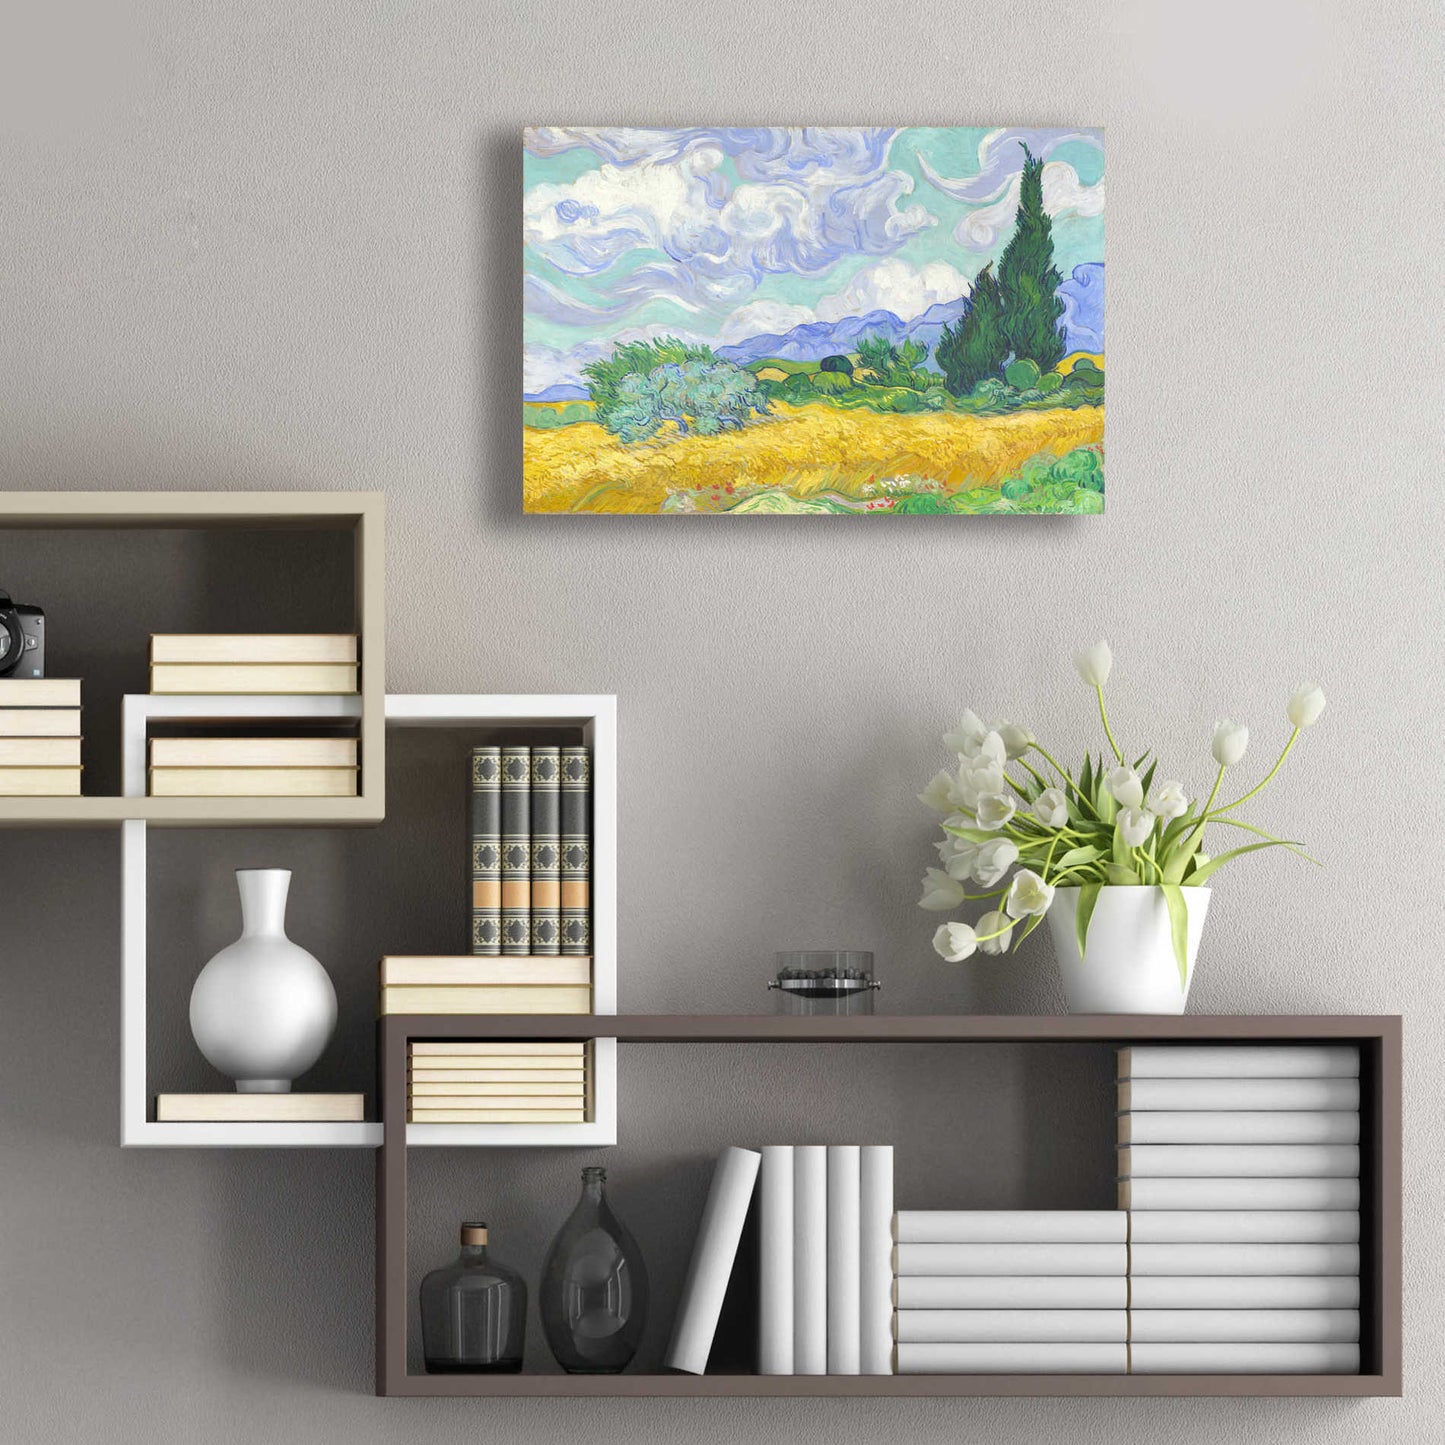 Epic Art 'Wheat Field with Cypresses' by Vincent van Gogh, Acrylic Glass Wall Art,24x16